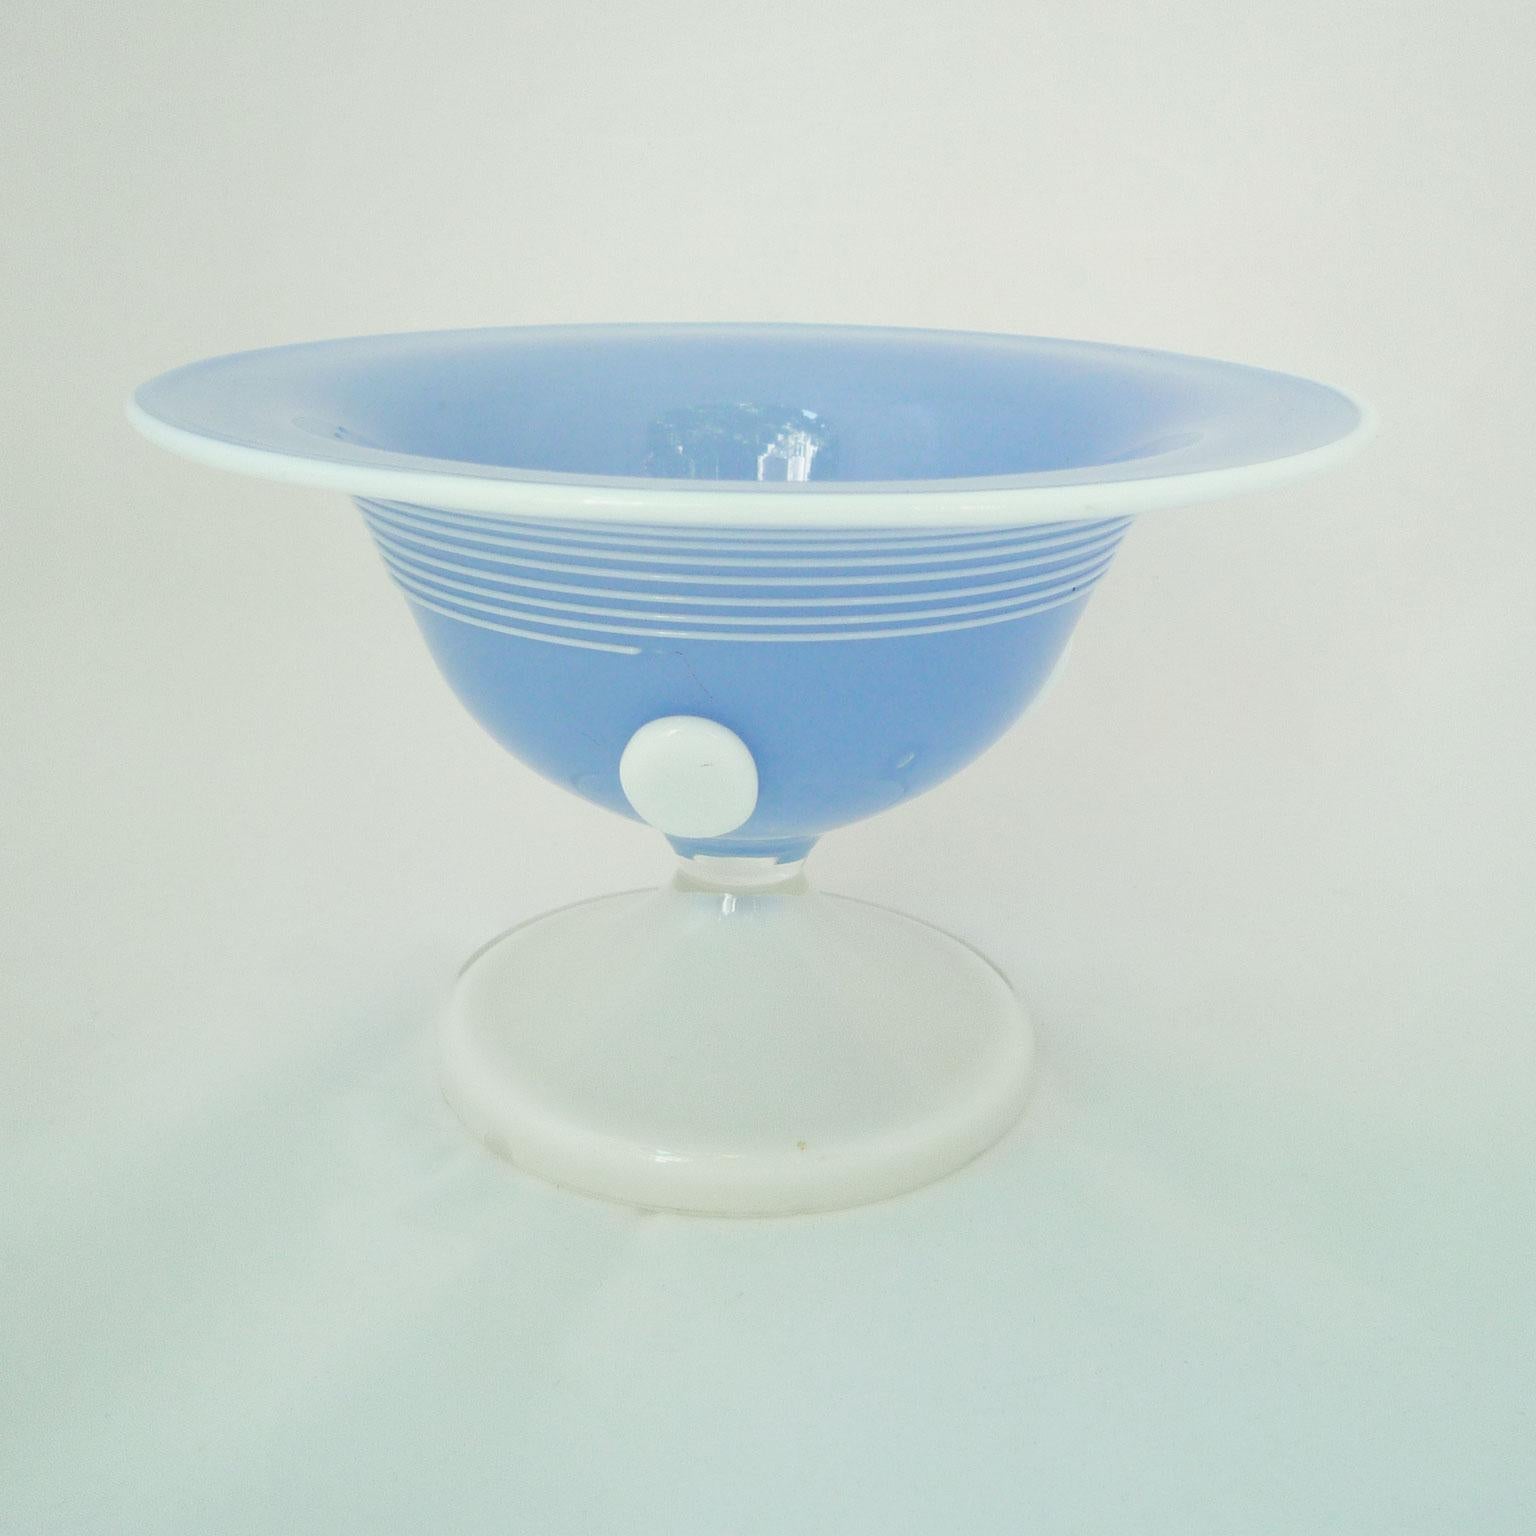 Early 20th Century Confectionery Bowl Series Tango, Loetz, Powolny, Flashed Glass, 1920s, Art Deco